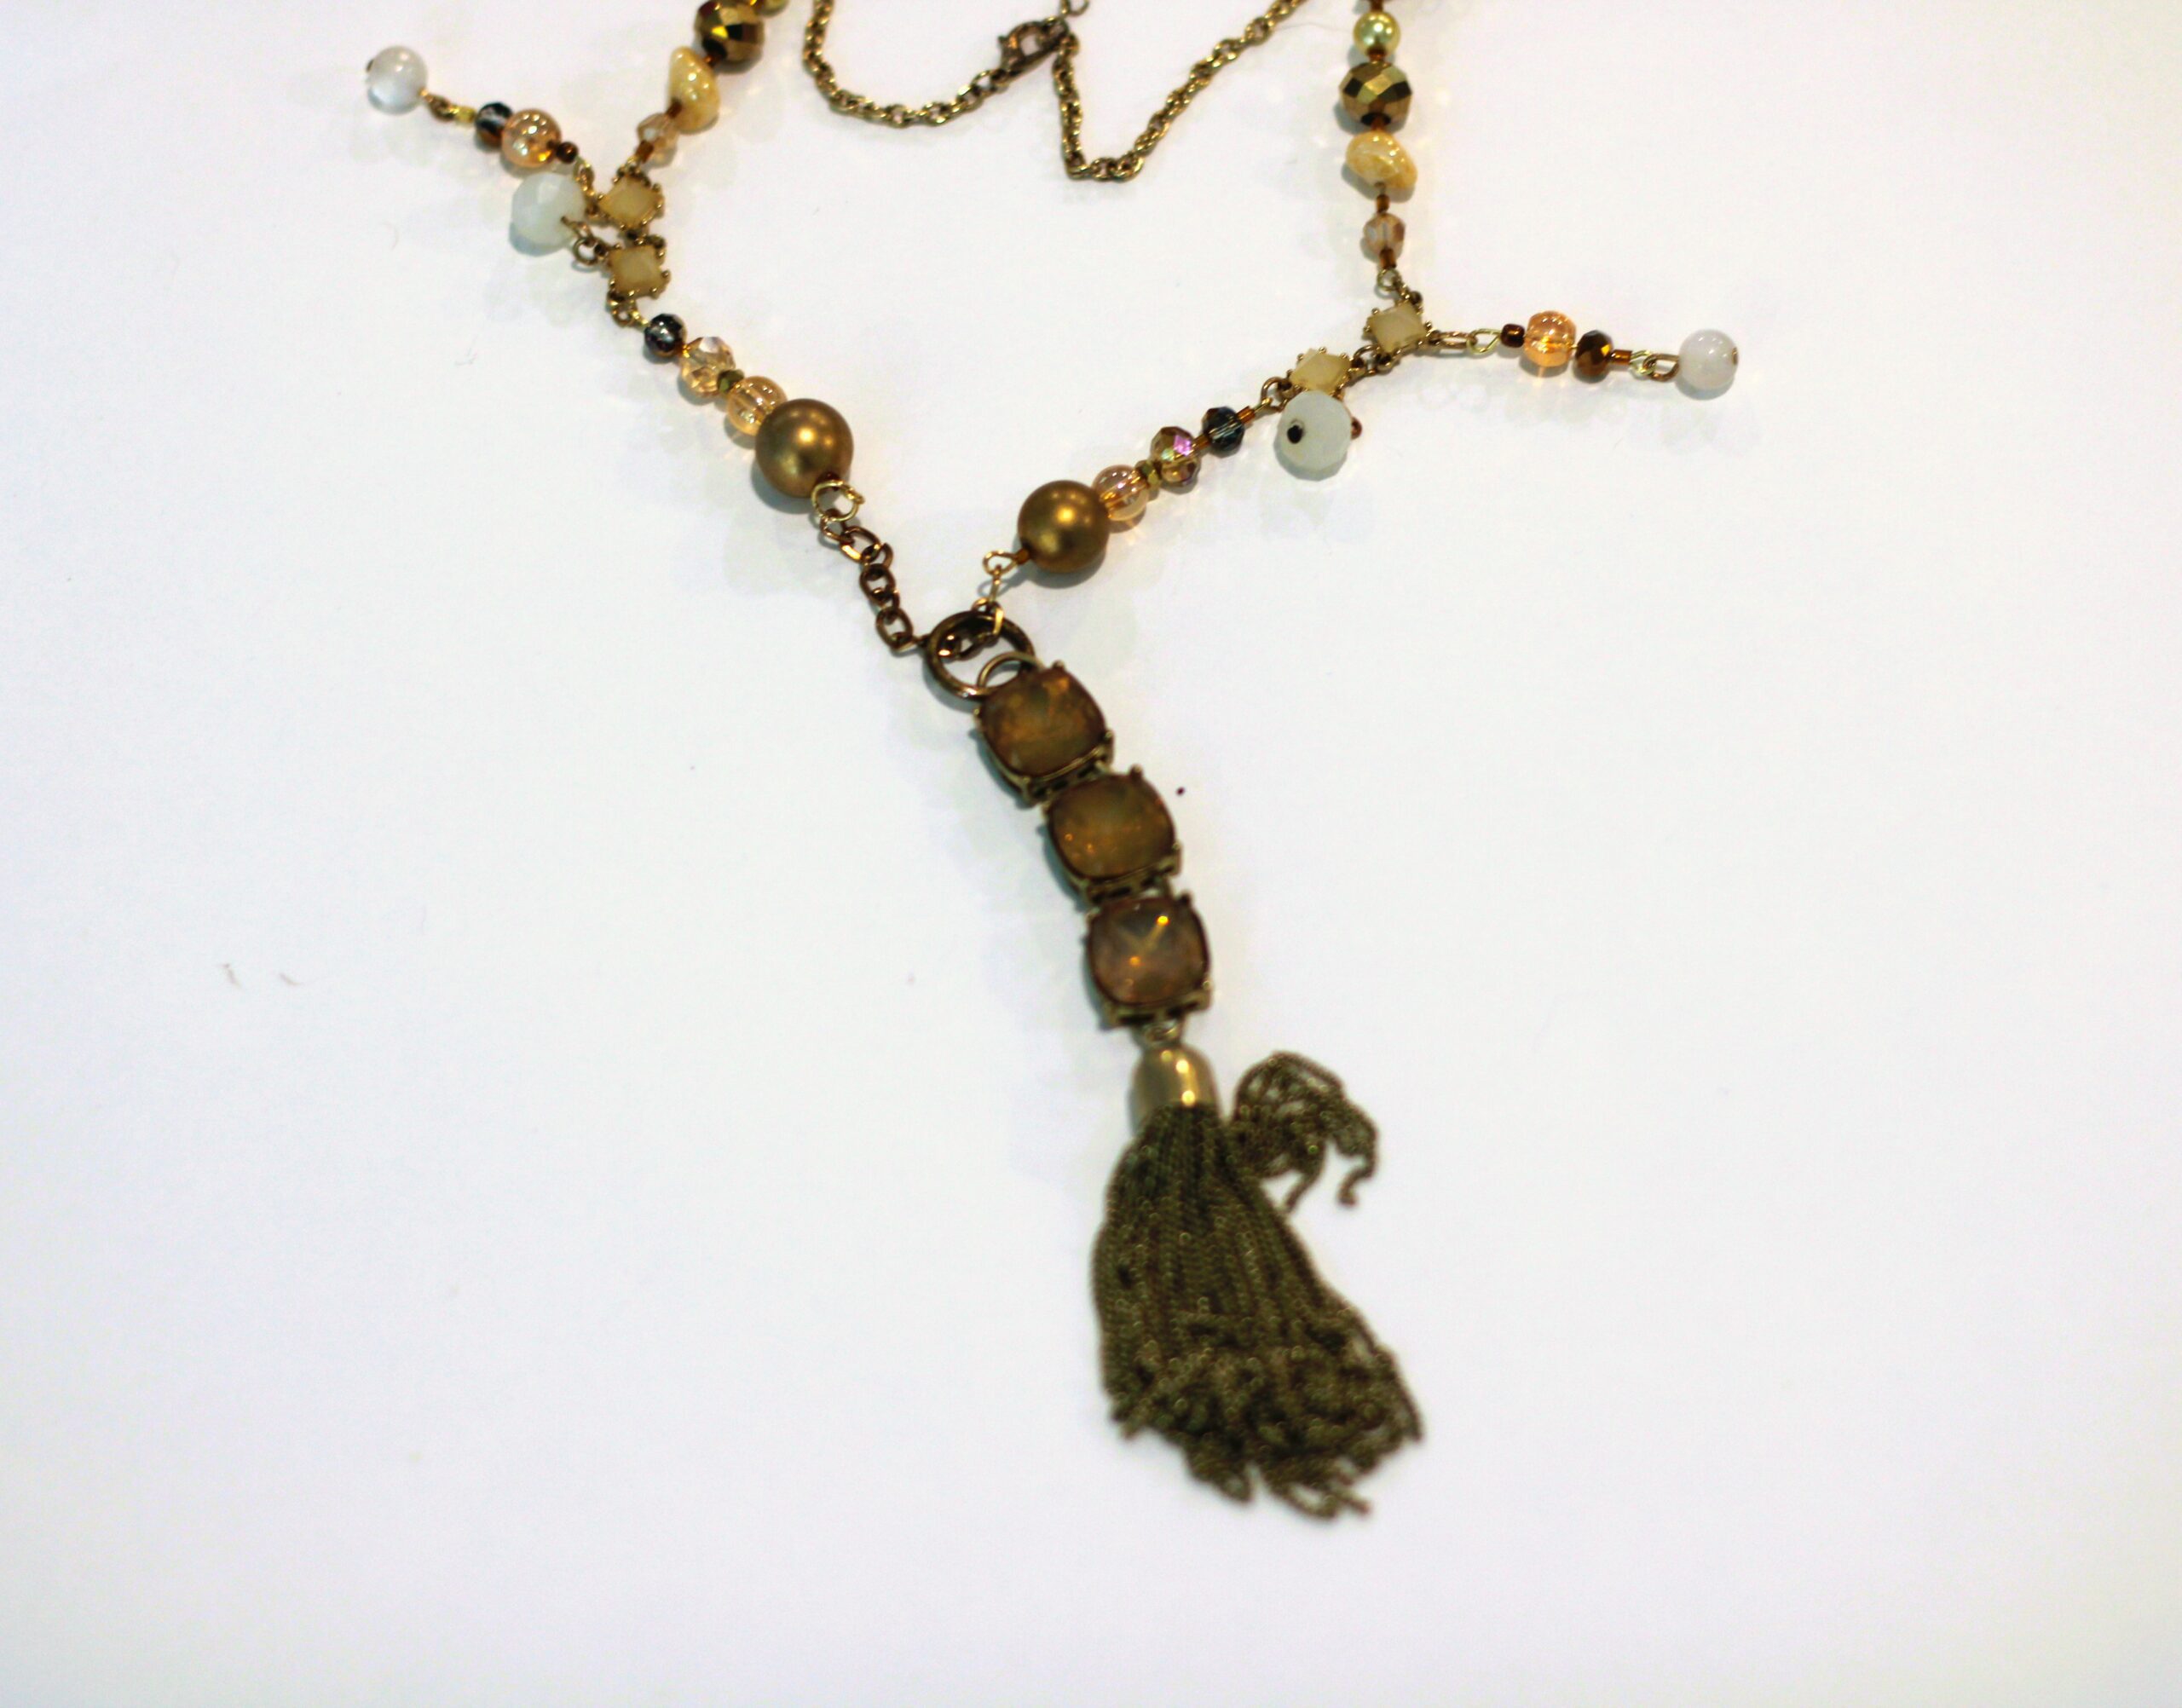 A necklace with a tassel and beads.